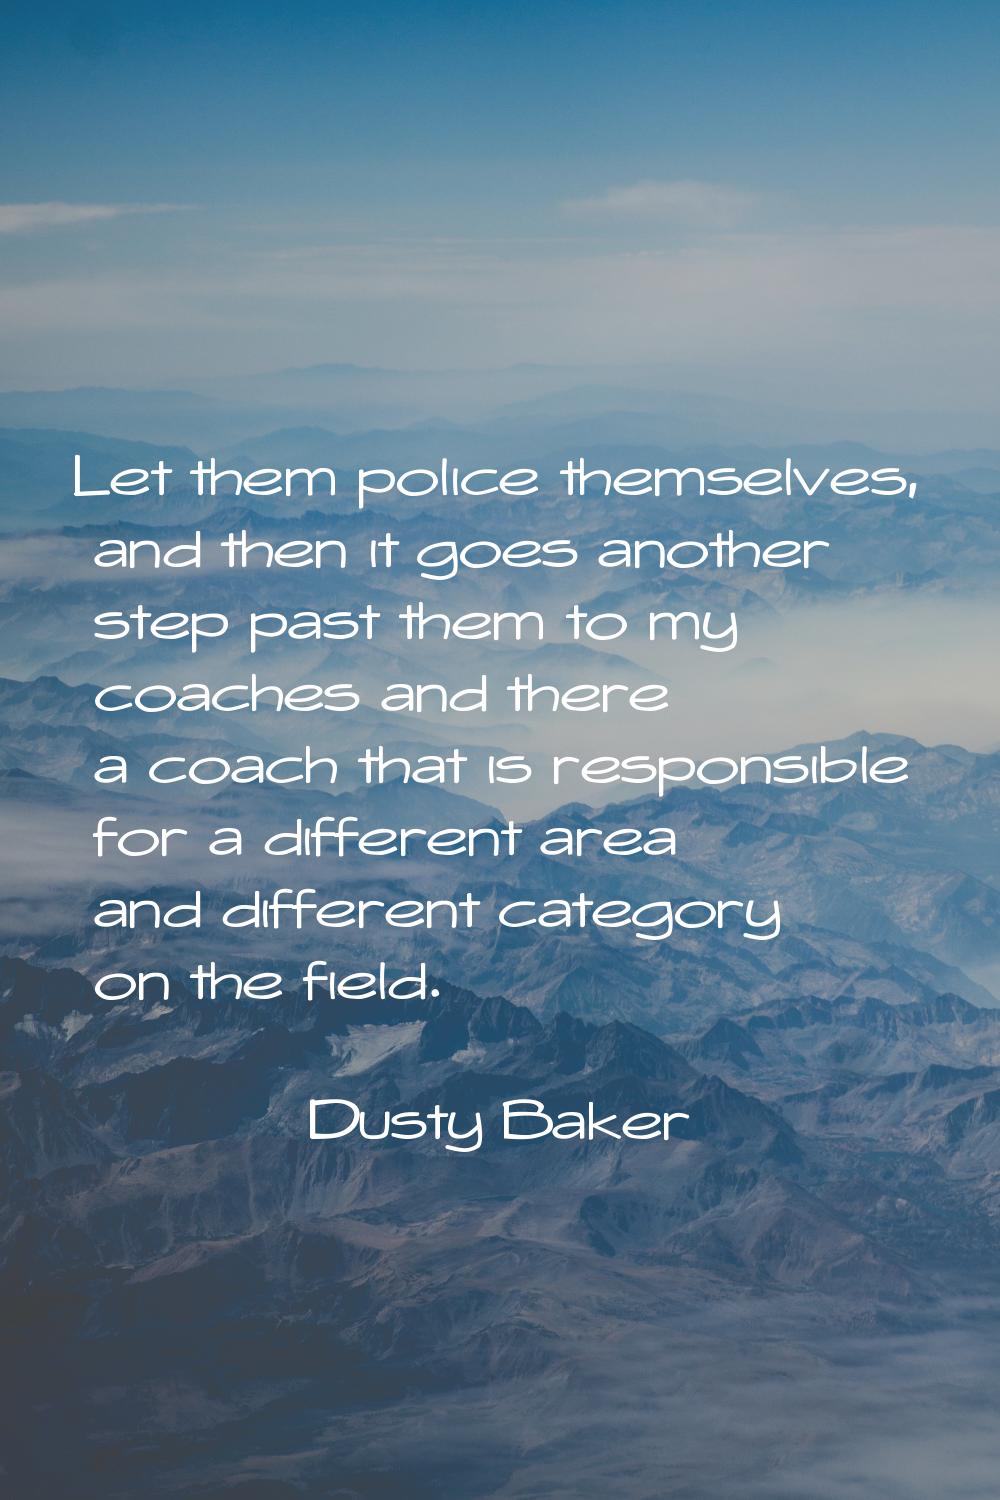 Let them police themselves, and then it goes another step past them to my coaches and there a coach